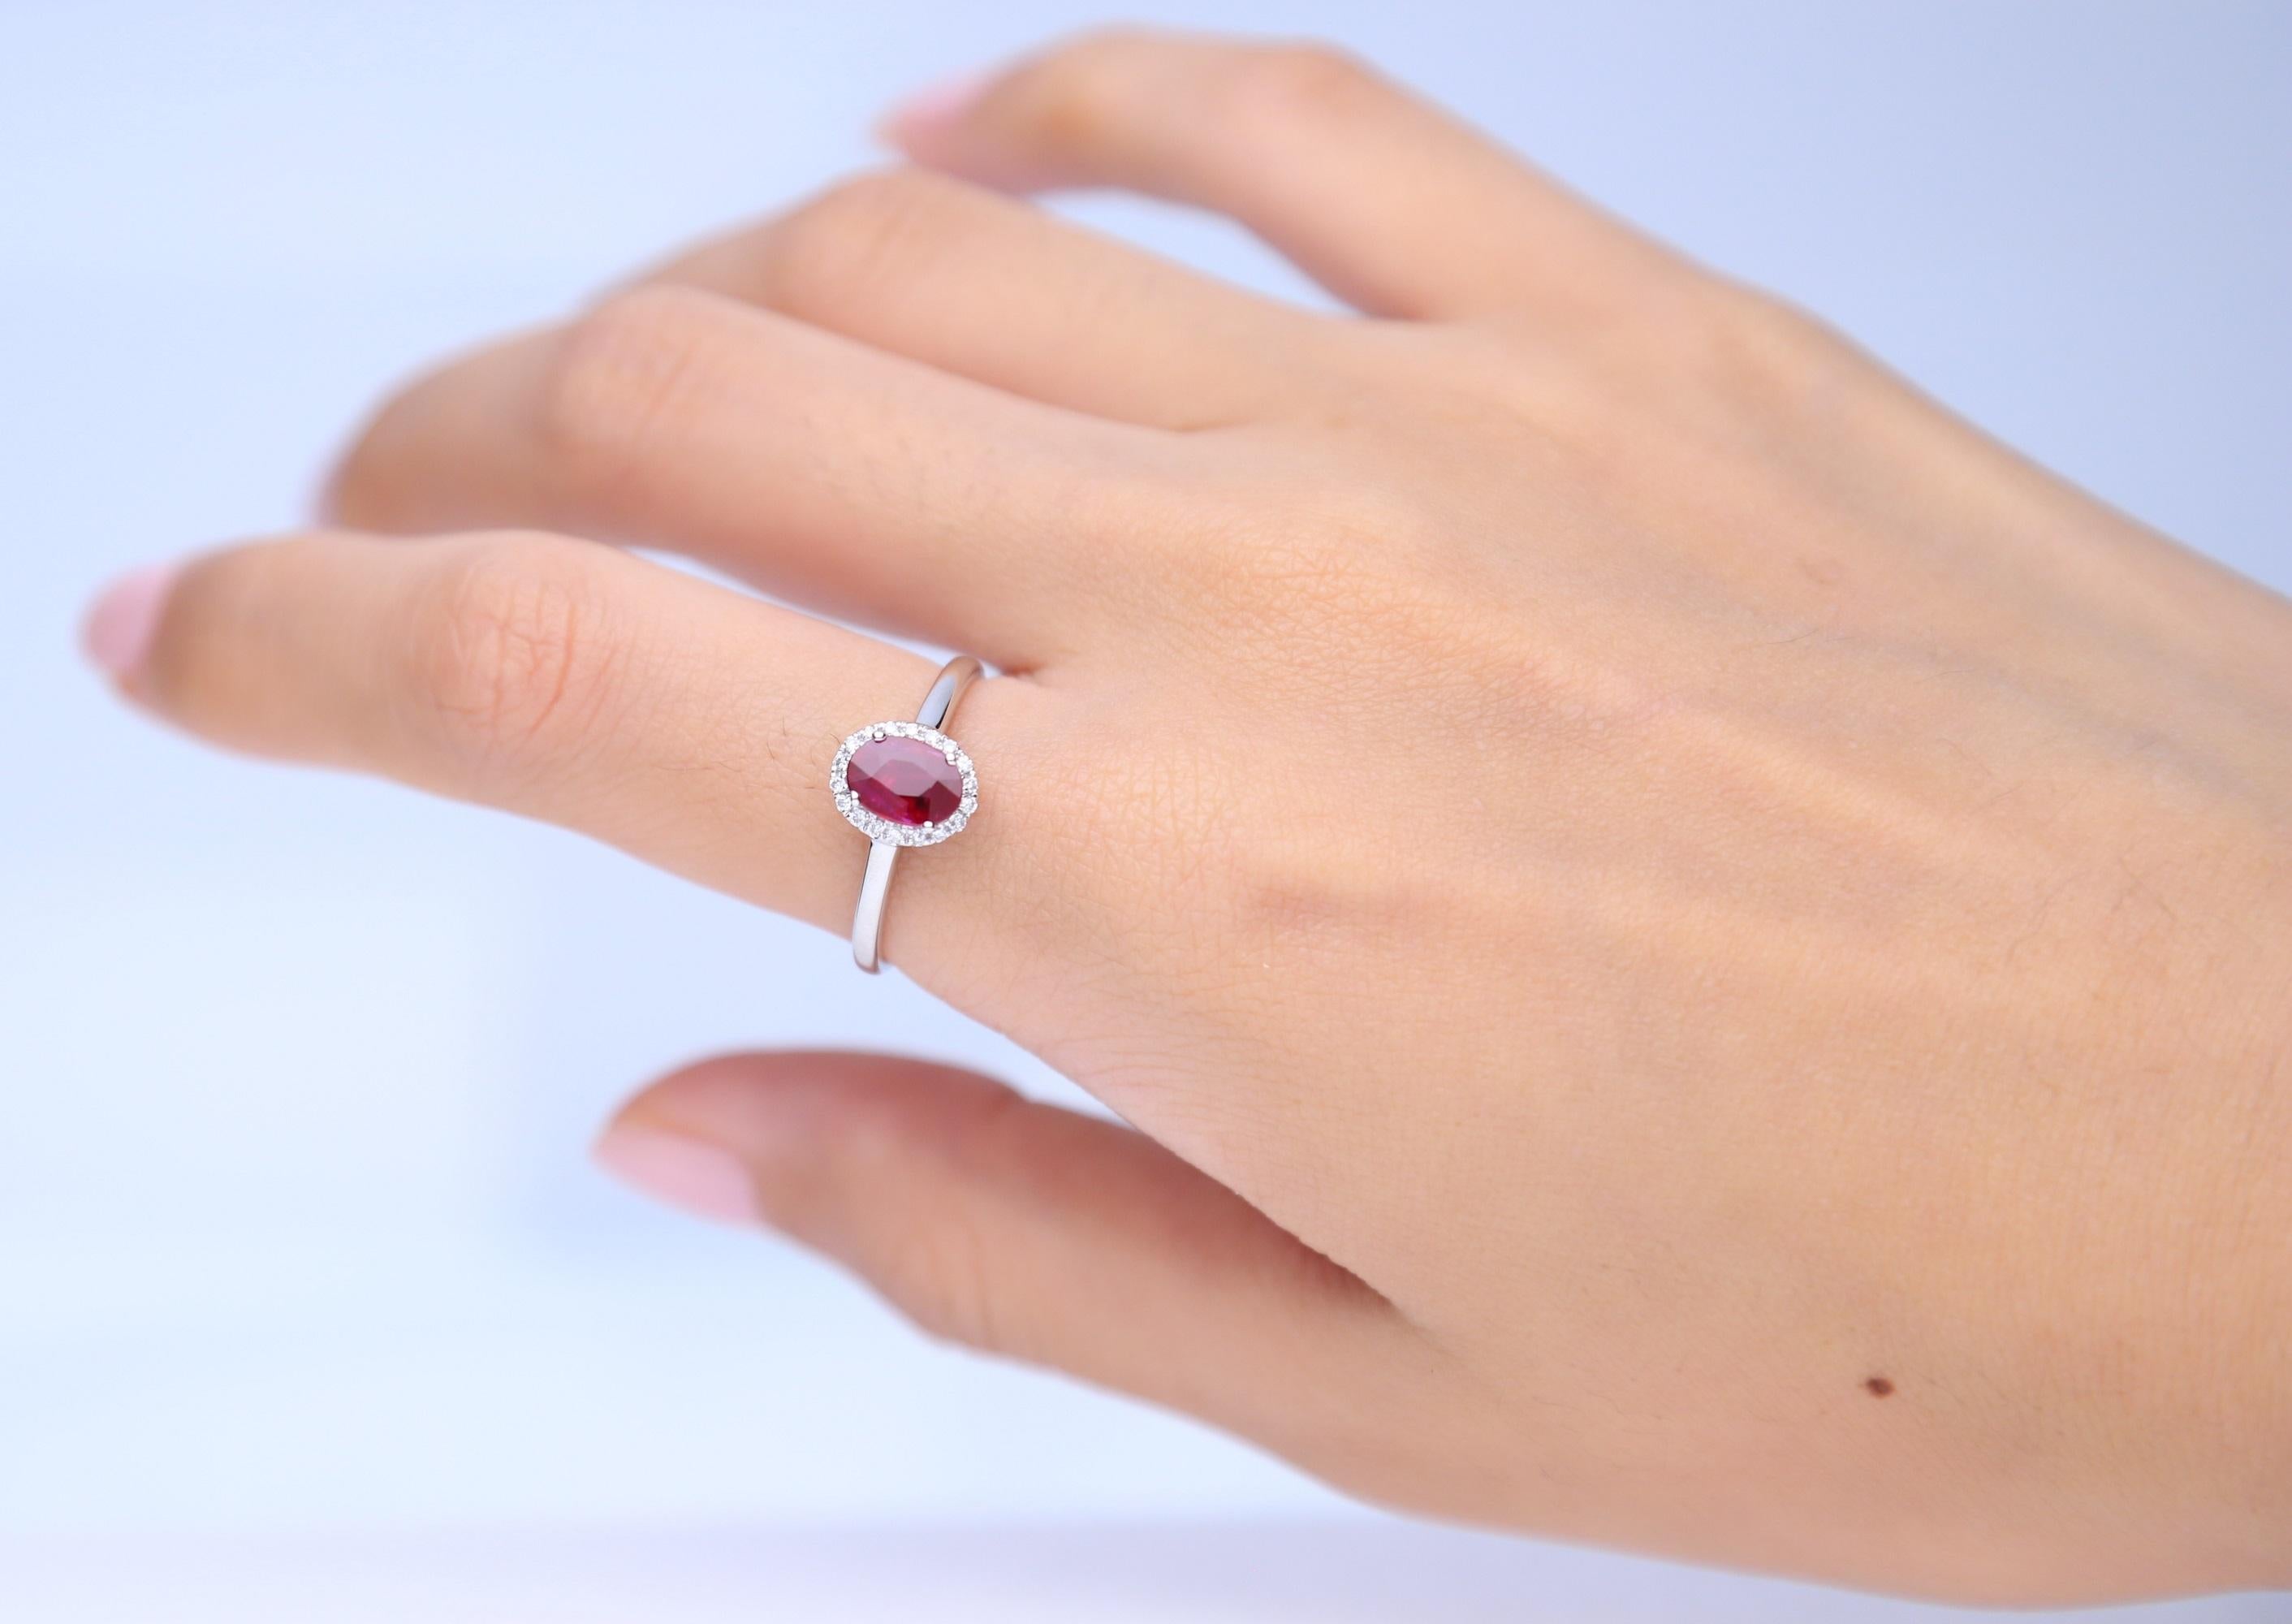 Stunning, timeless and classy eternity Unique Ring. Decorate yourself in luxury with this Gin & Grace Ring. The 10K White Gold jewelry boasts with Oval-cut 1 pcs 0.84 carat Ruby and Natural Round-cut white Diamond (18 Pcs) 0.10 Carat accent stones